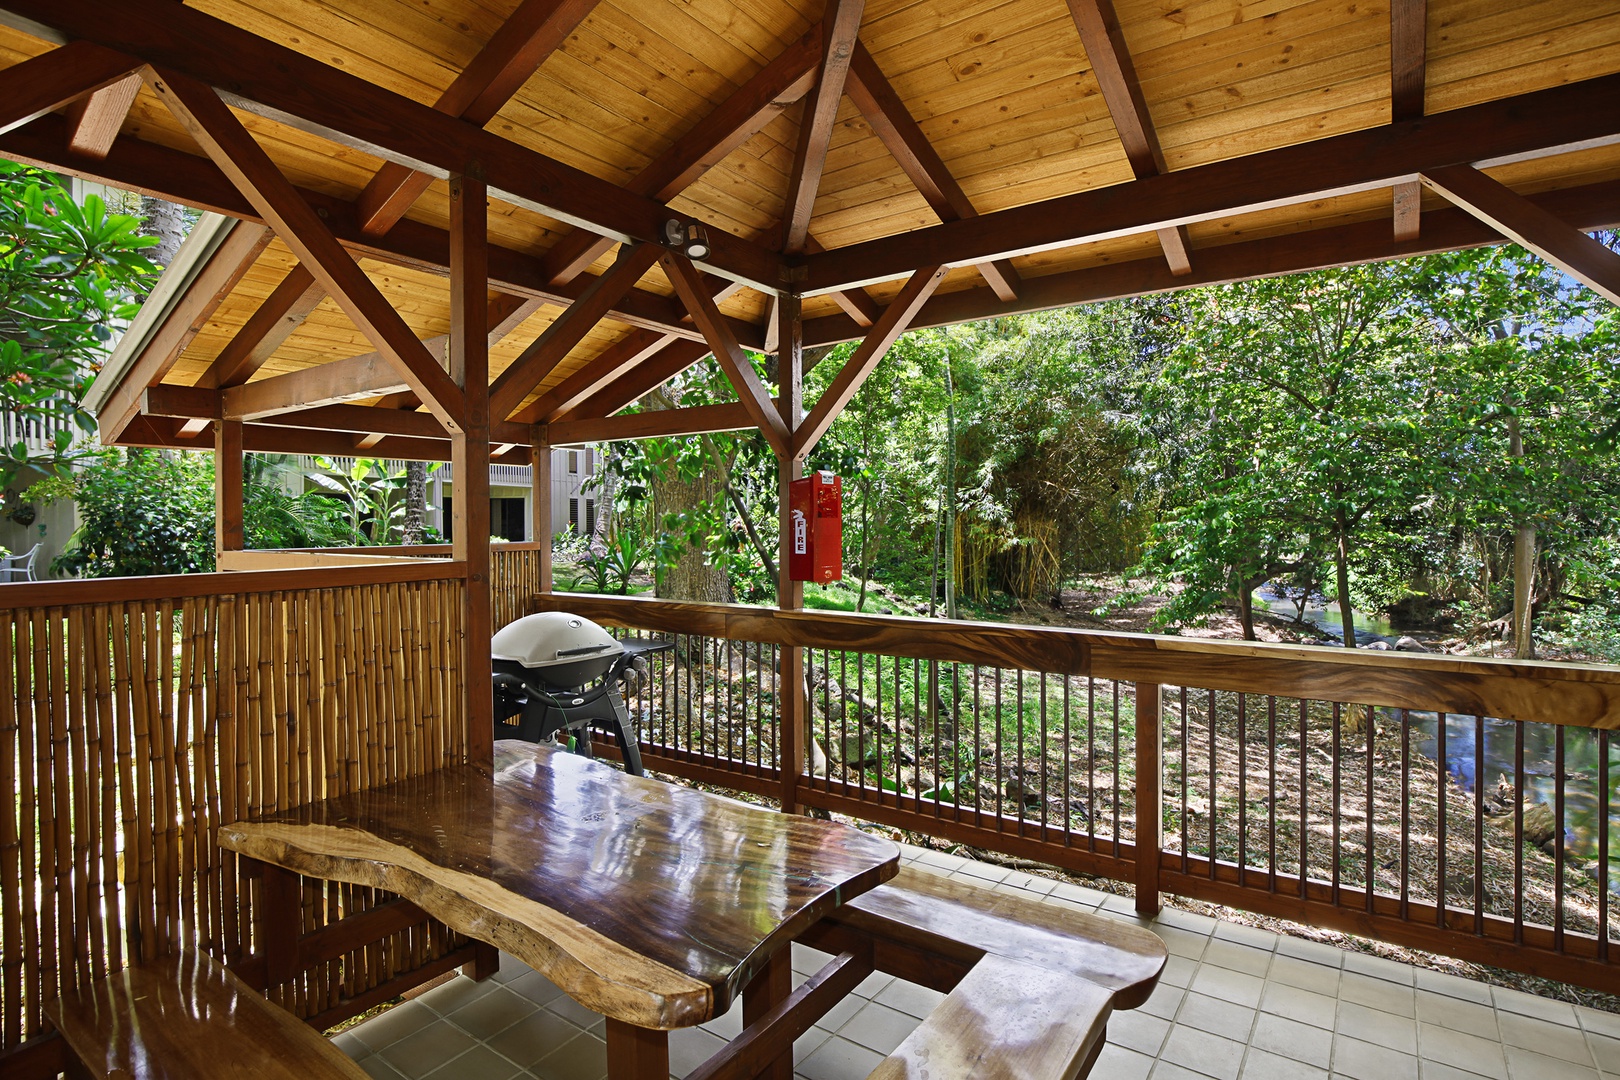 Koloa Vacation Rentals, Waikomo Streams 203 - Enjoy outdoors in a shared BBQ area, where friends and family Gather to savor delicious meals and create lasting memories